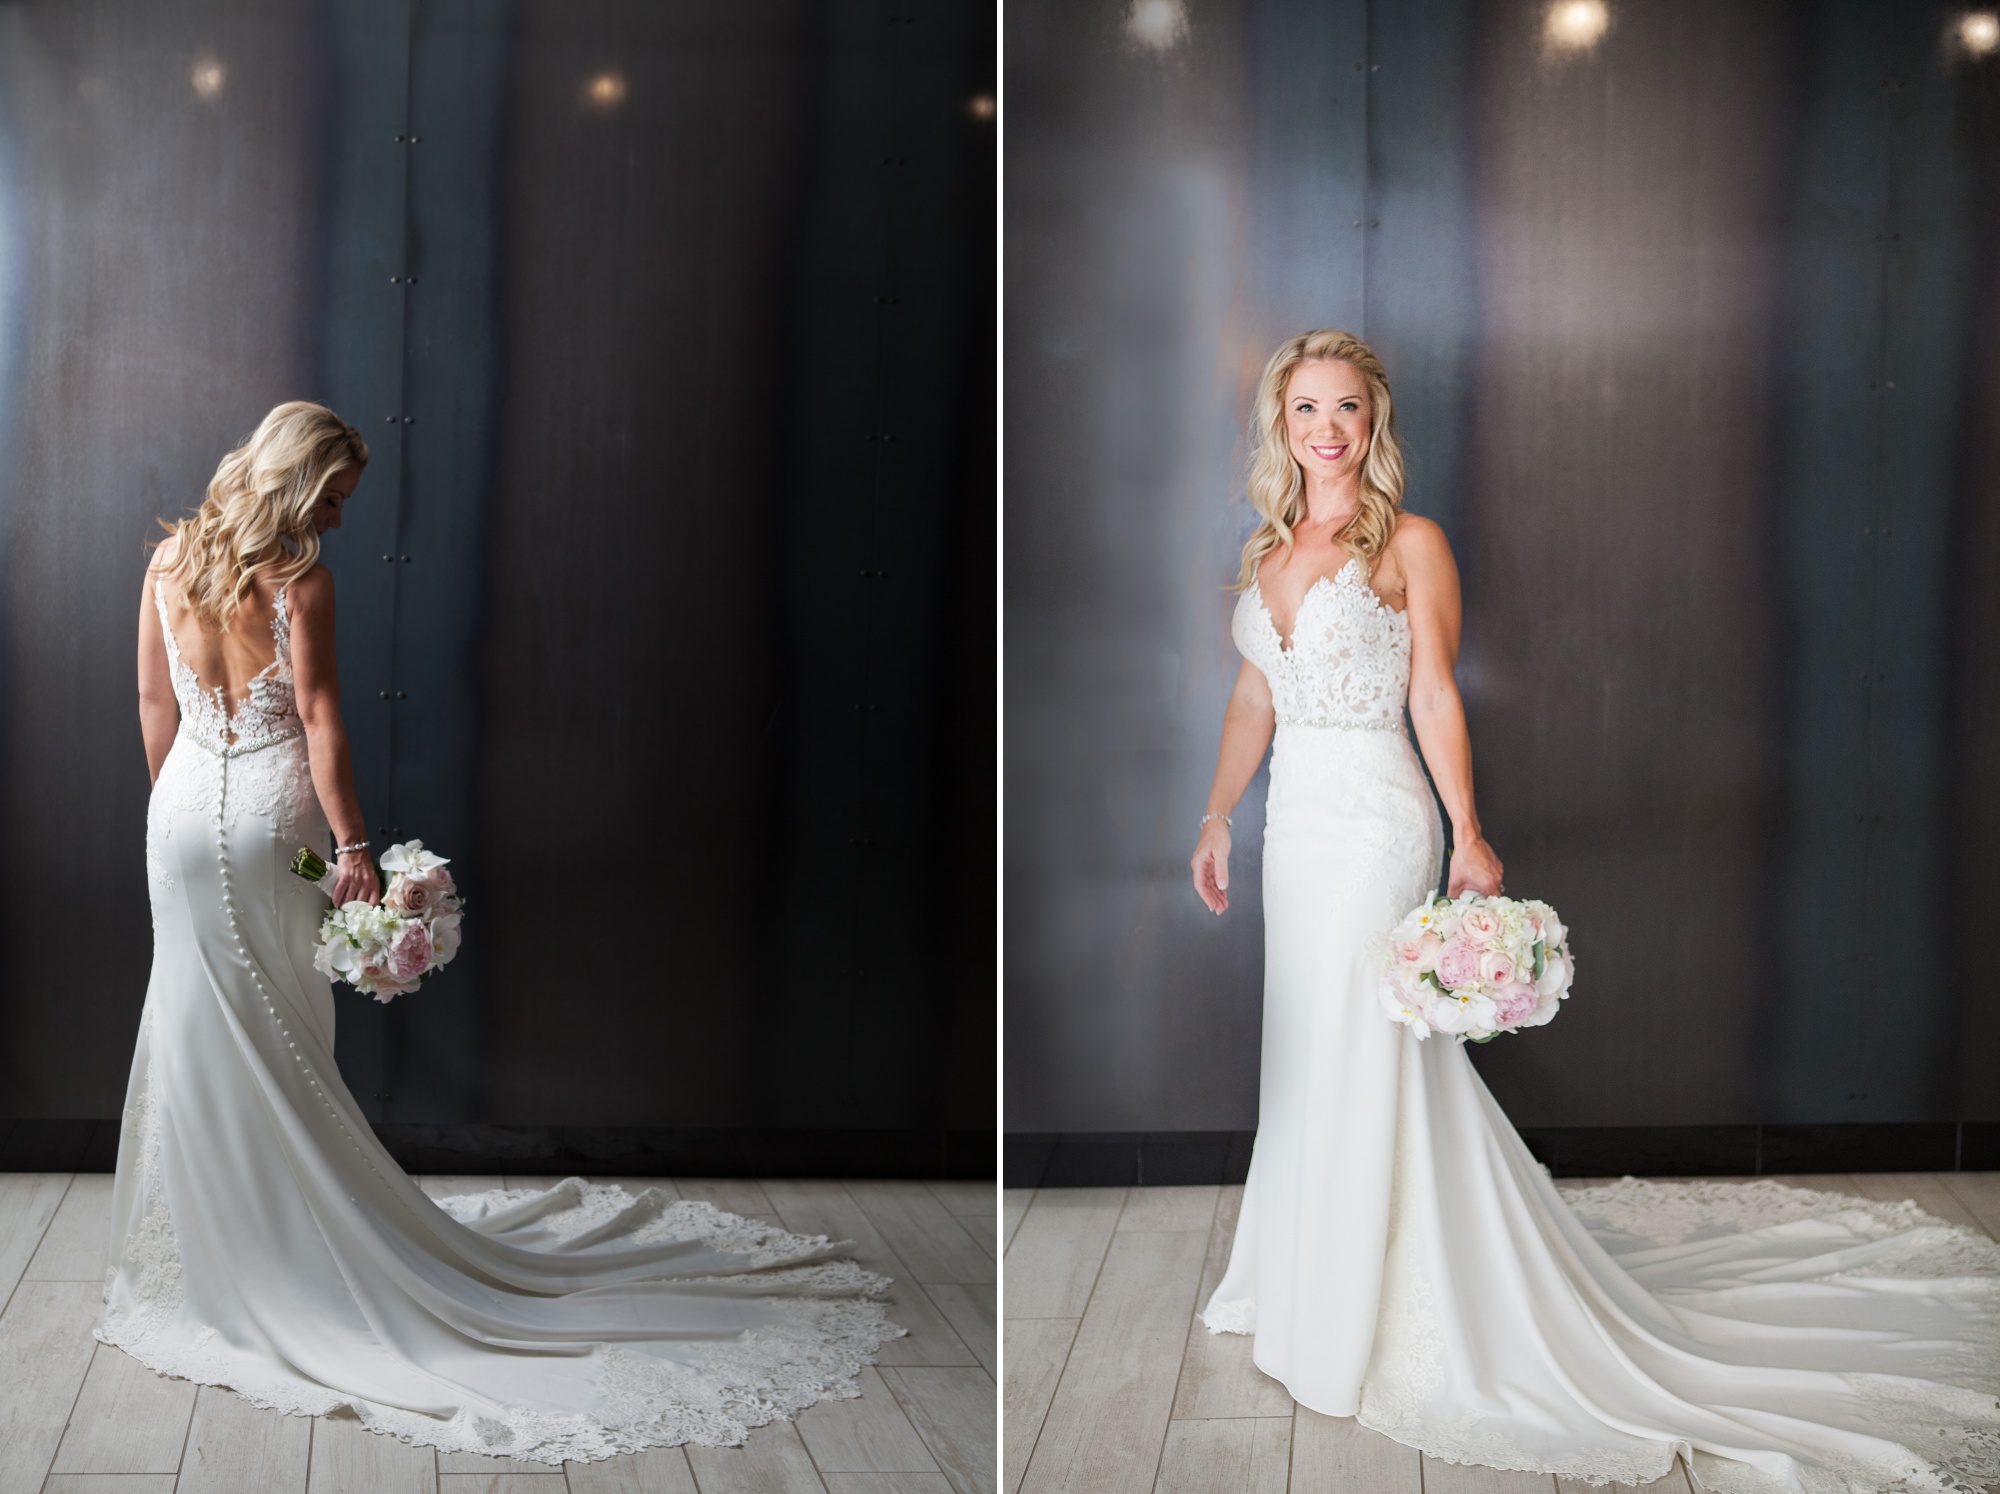 Bride and bridal photos before wedding ceremony and reception at City Club Nashville. Photos by Krista Lee Photography. 